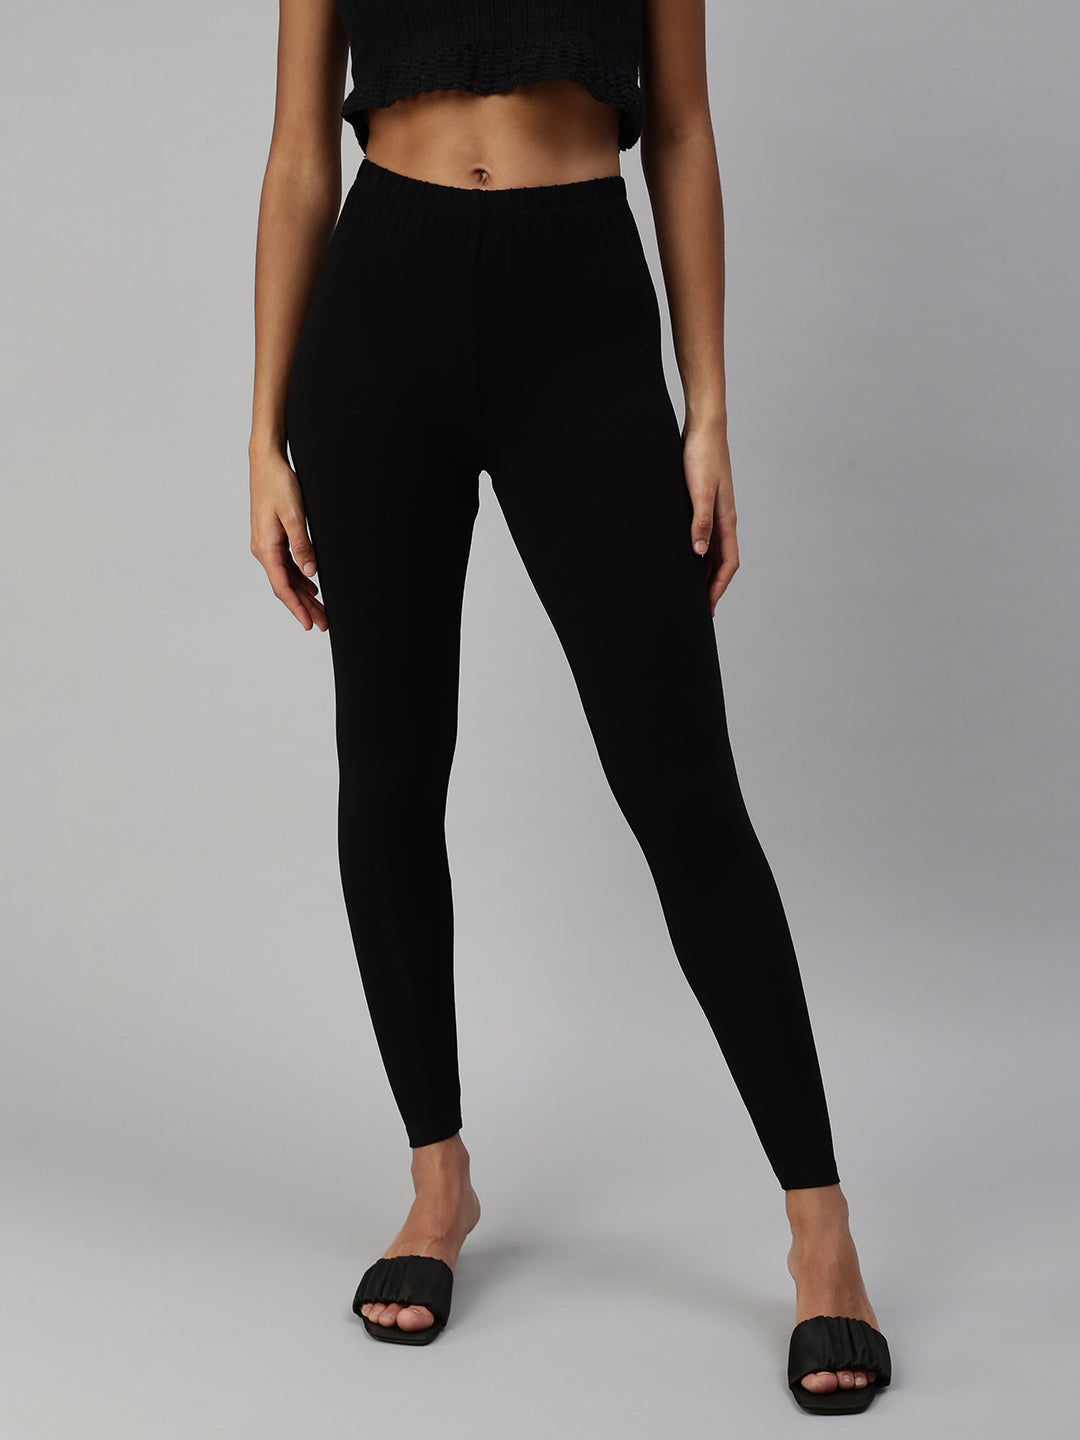 Occffy Workout Leggings for Women High Waisted Gym India | Ubuy